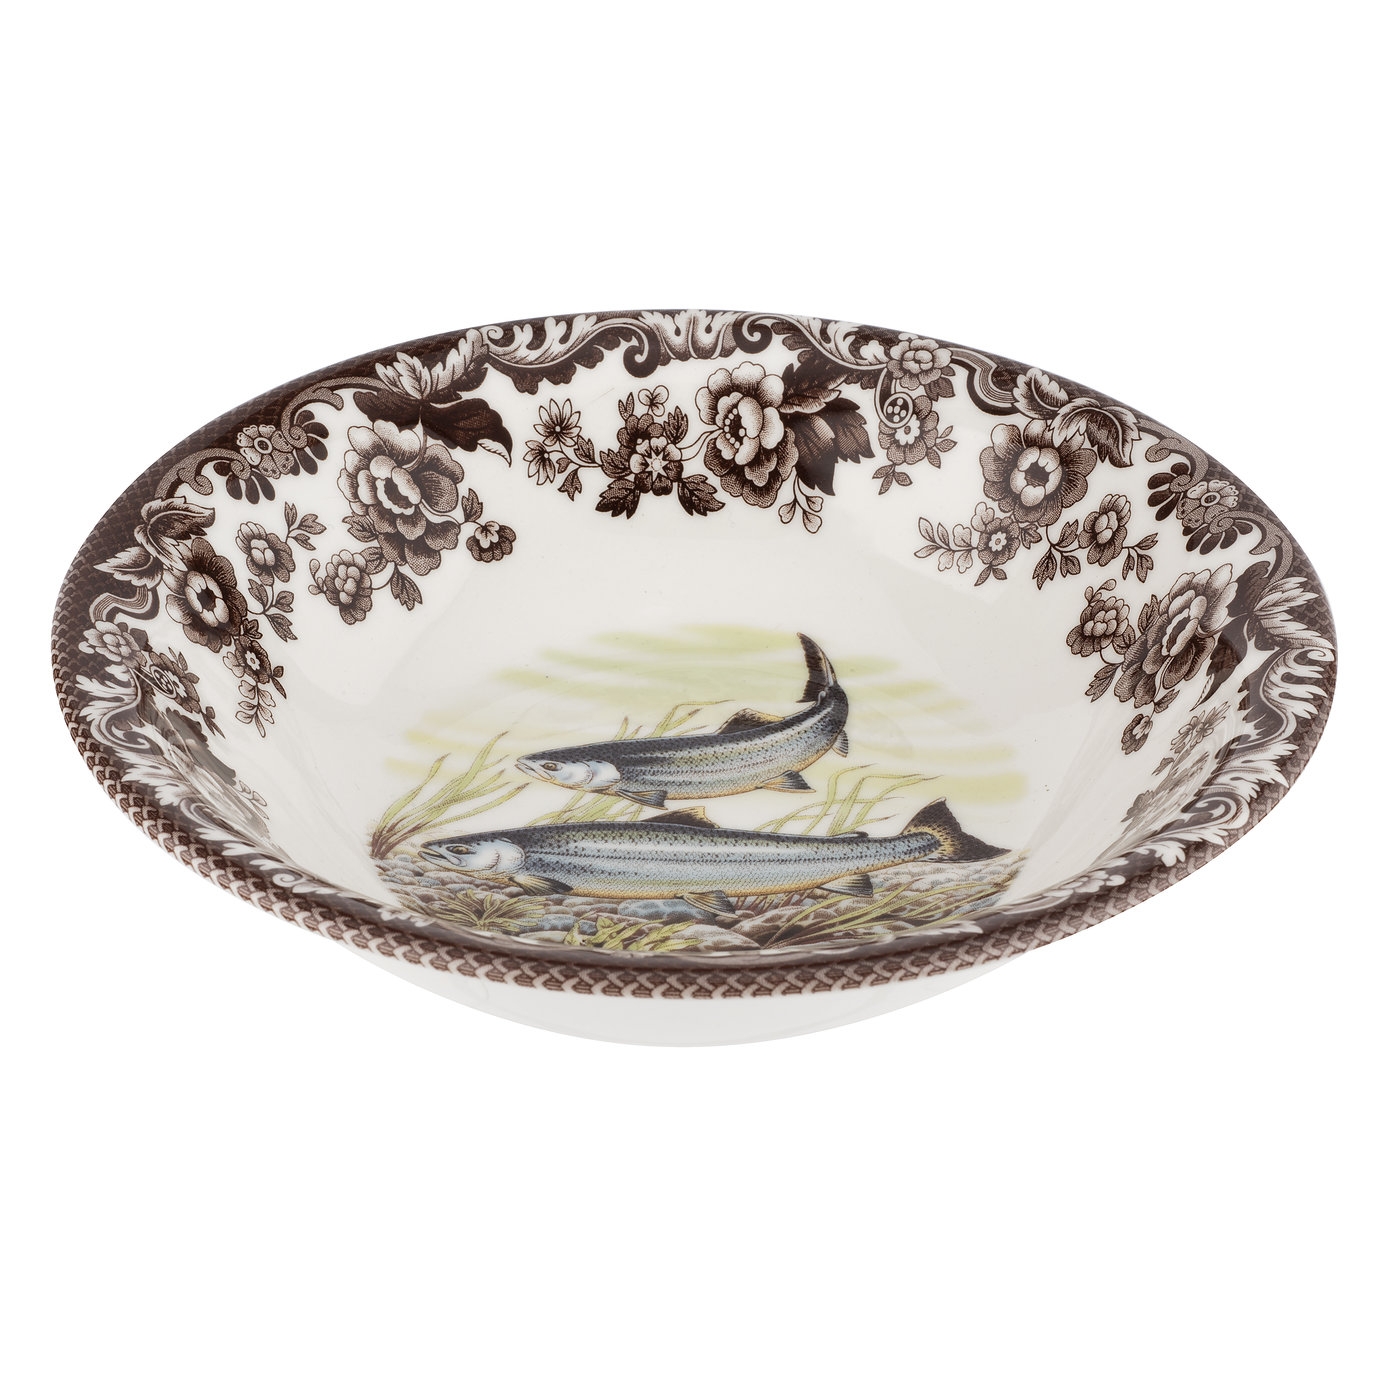 Woodland Ascot Cereal Bowl 8 Inch, King Salmon image number null